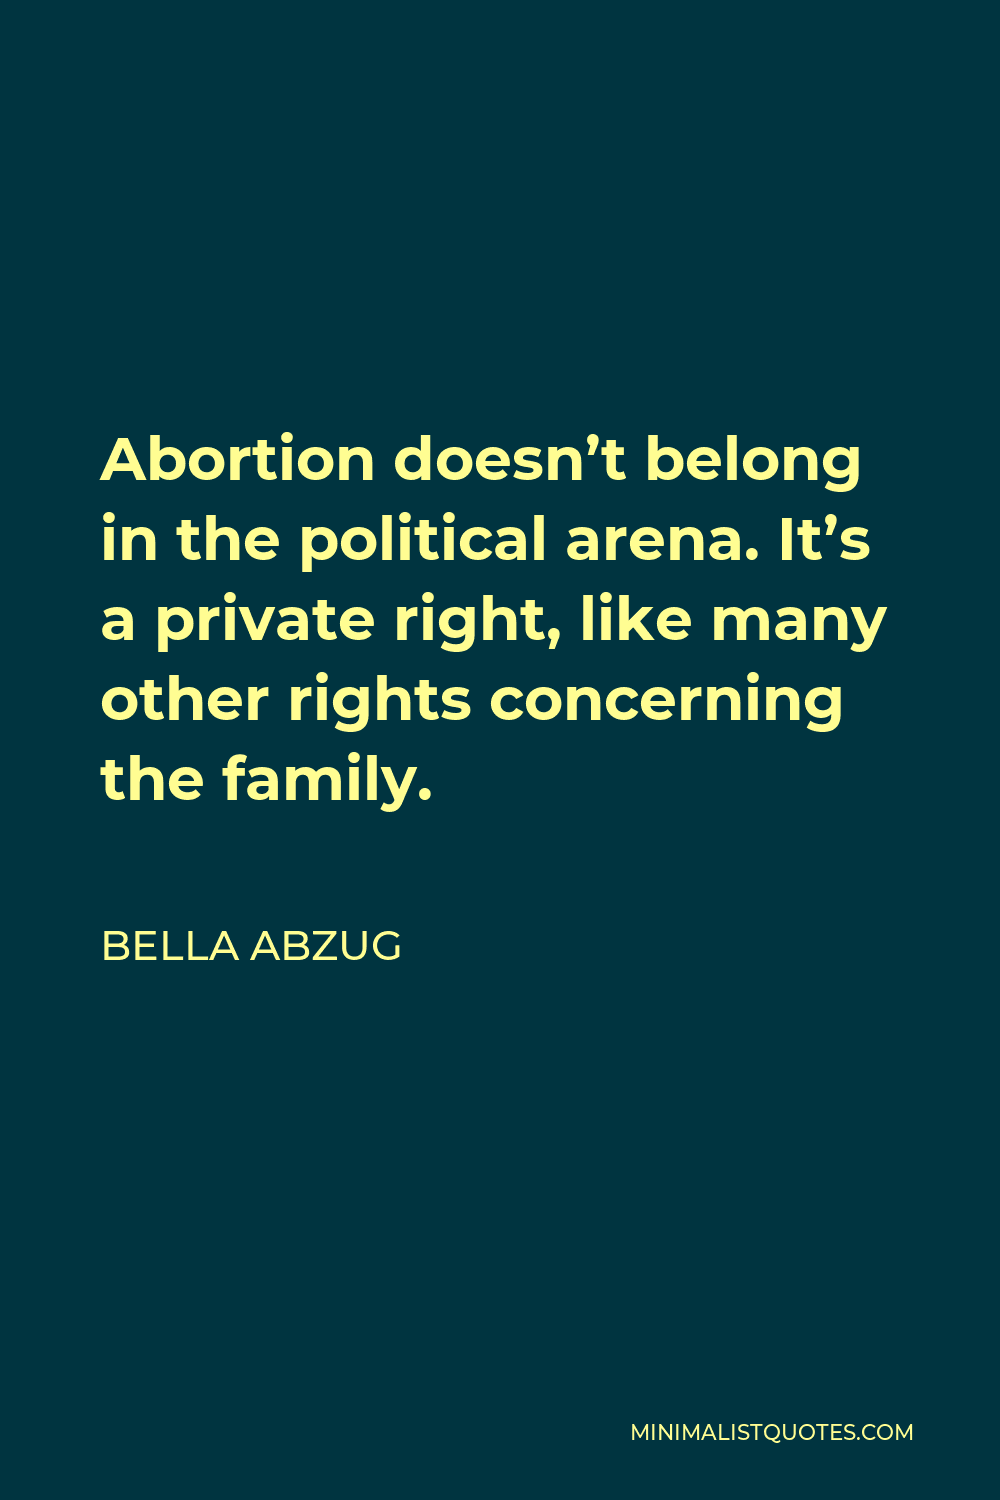 Bella Abzug Quote - Abortion doesn’t belong in the political arena. It’s a private right, like many other rights concerning the family.